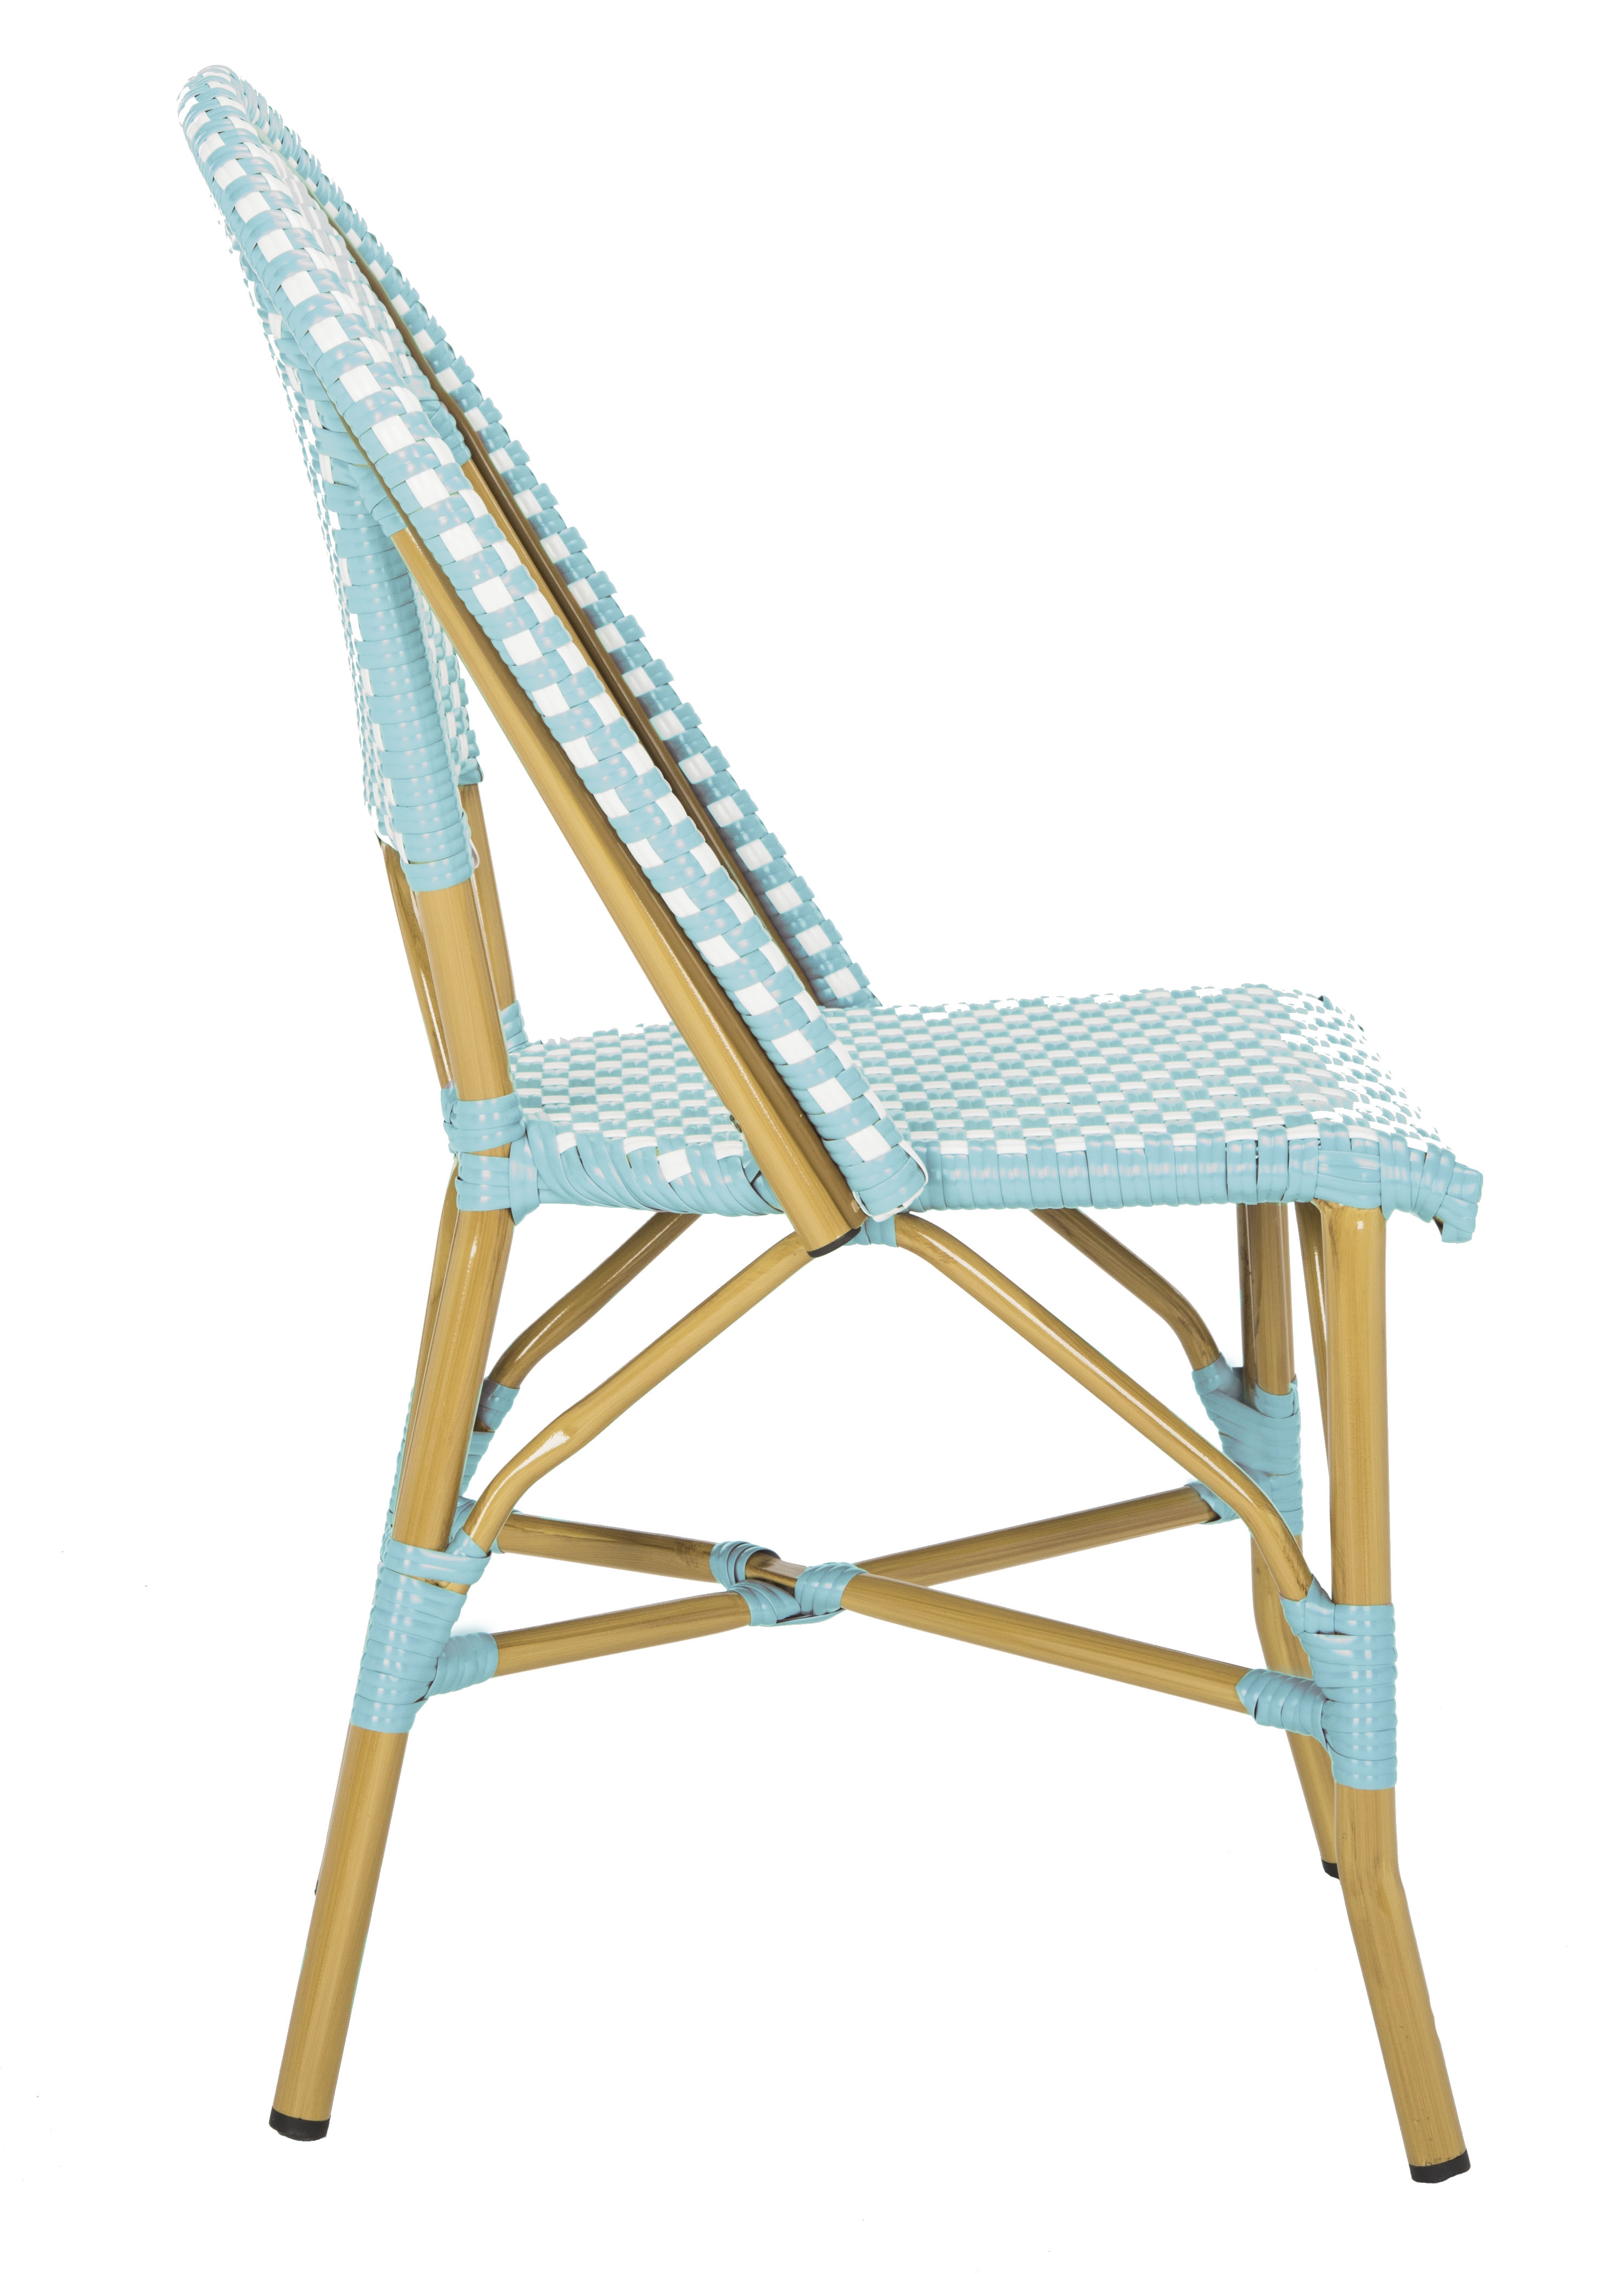 Salcha Indoor-Outdoor French Bistro Stacking Side Chair - Teal/White/Light Brown - Arlo Home - Image 3